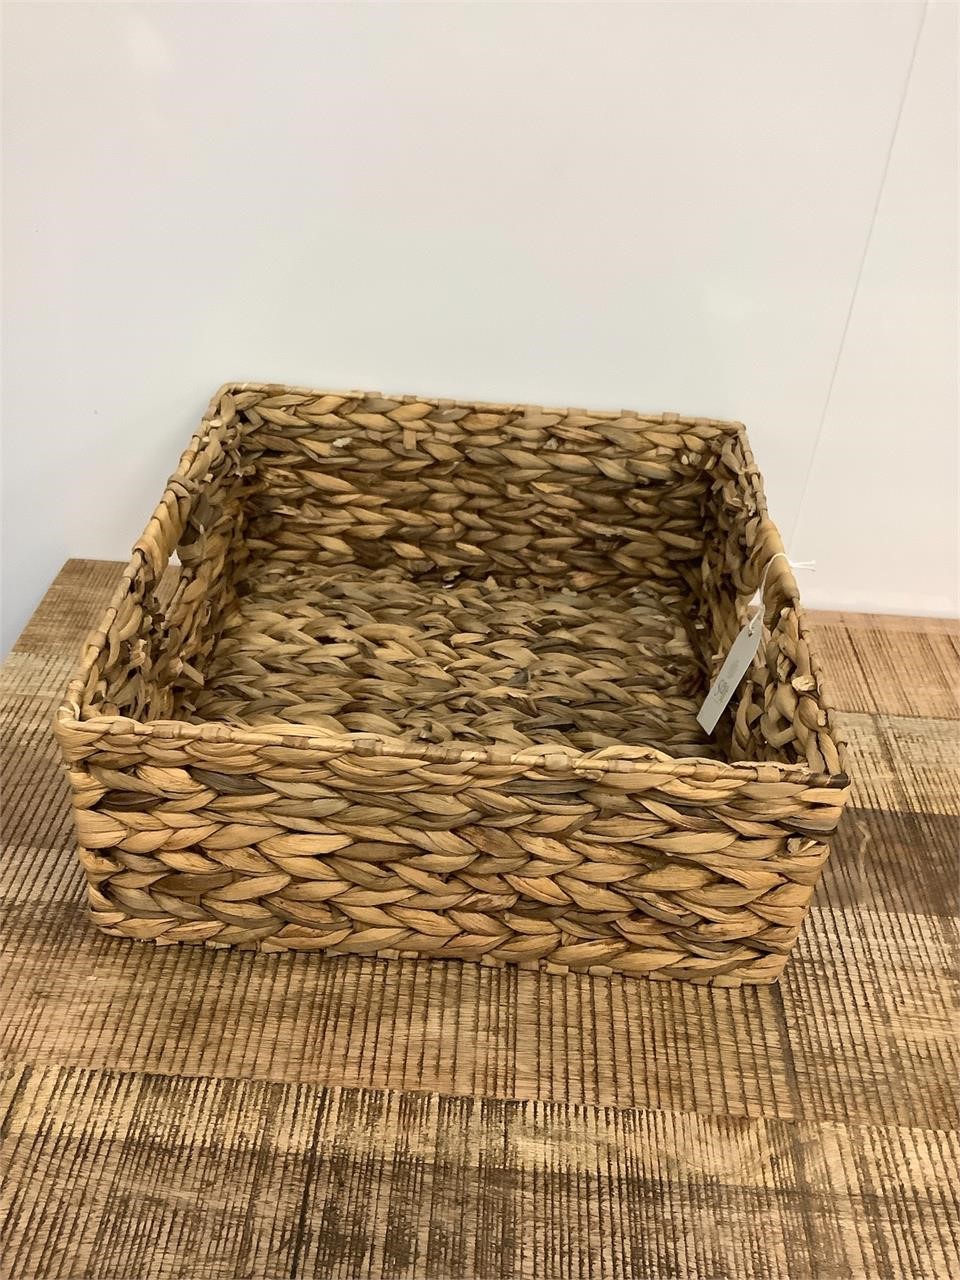 $45  Large square whicker basket